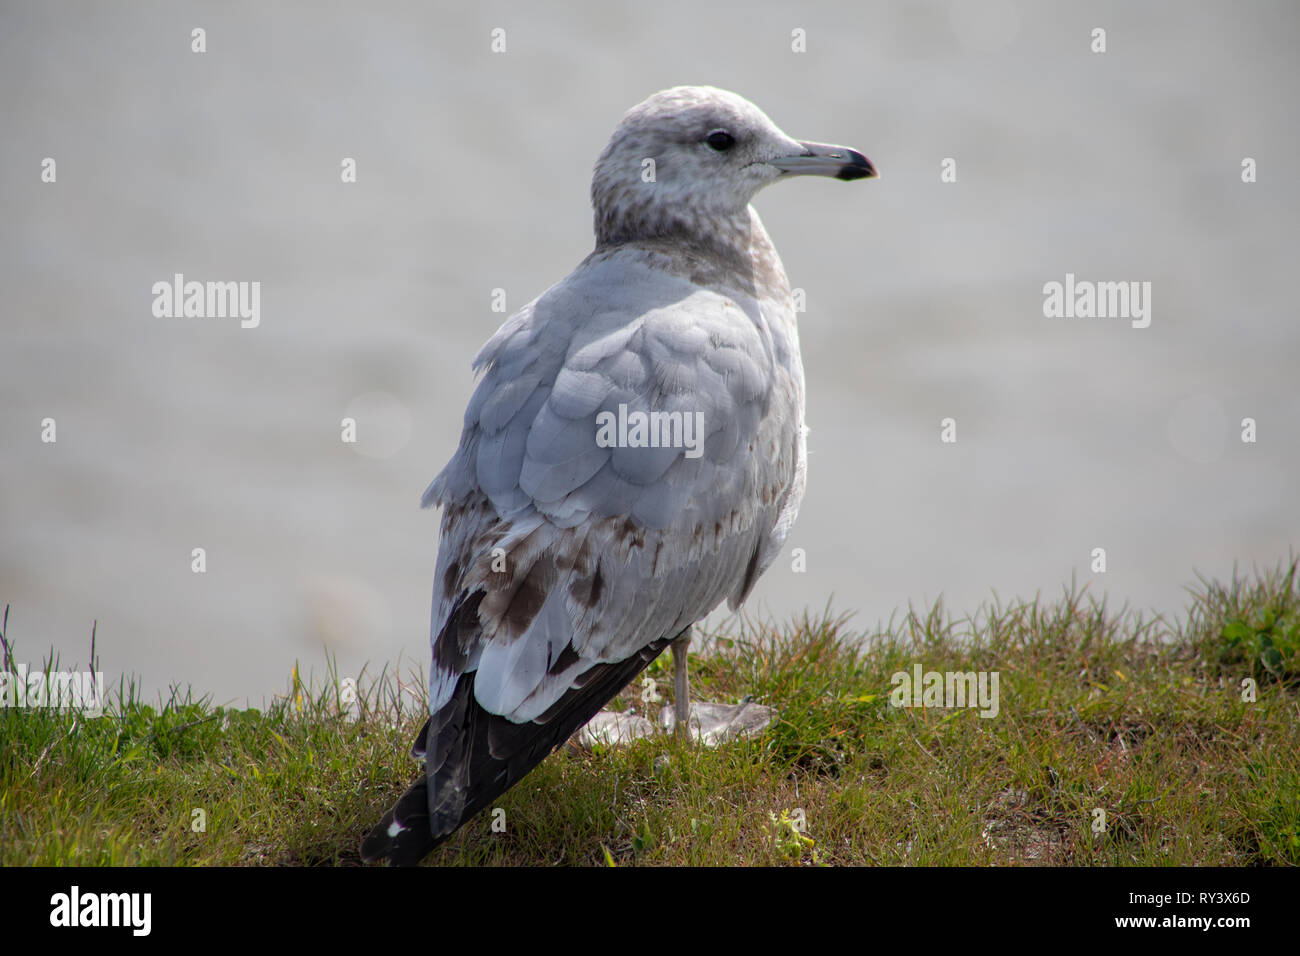 Seagull perched on grass by beach in California Stock Photo